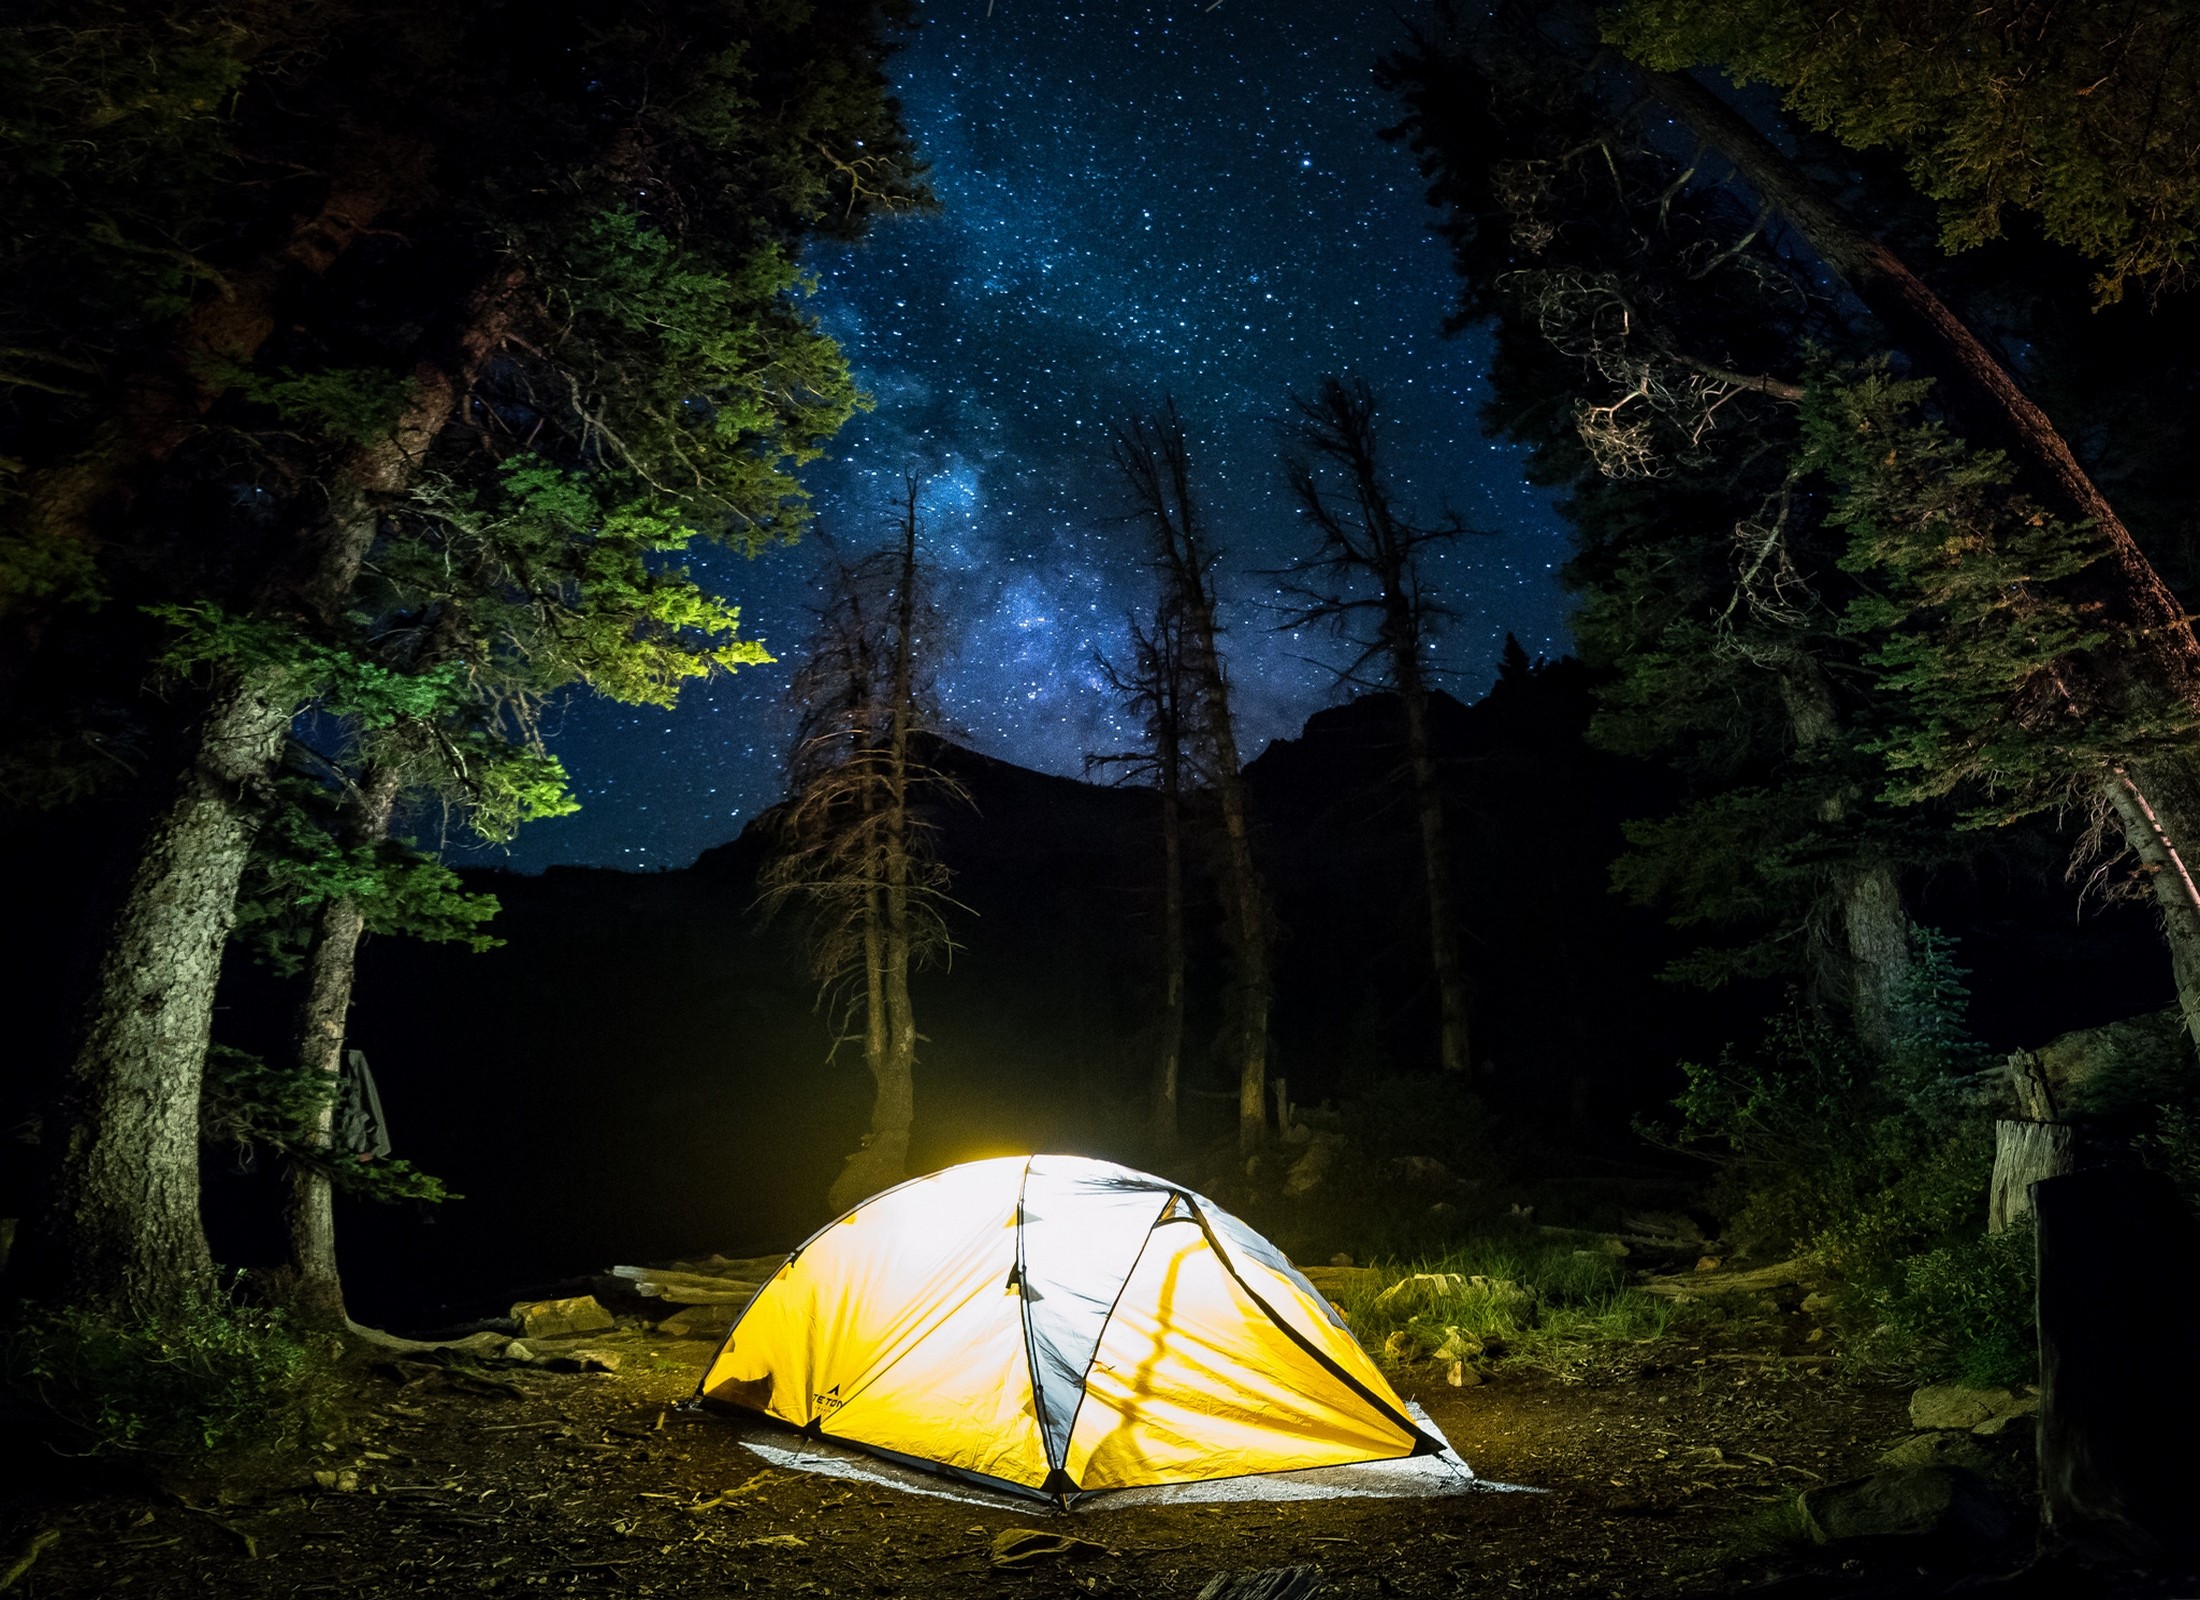 General 2200x1600 nature camping forest starry night Milky Way trees long exposure lights mountains shrubs blue yellow